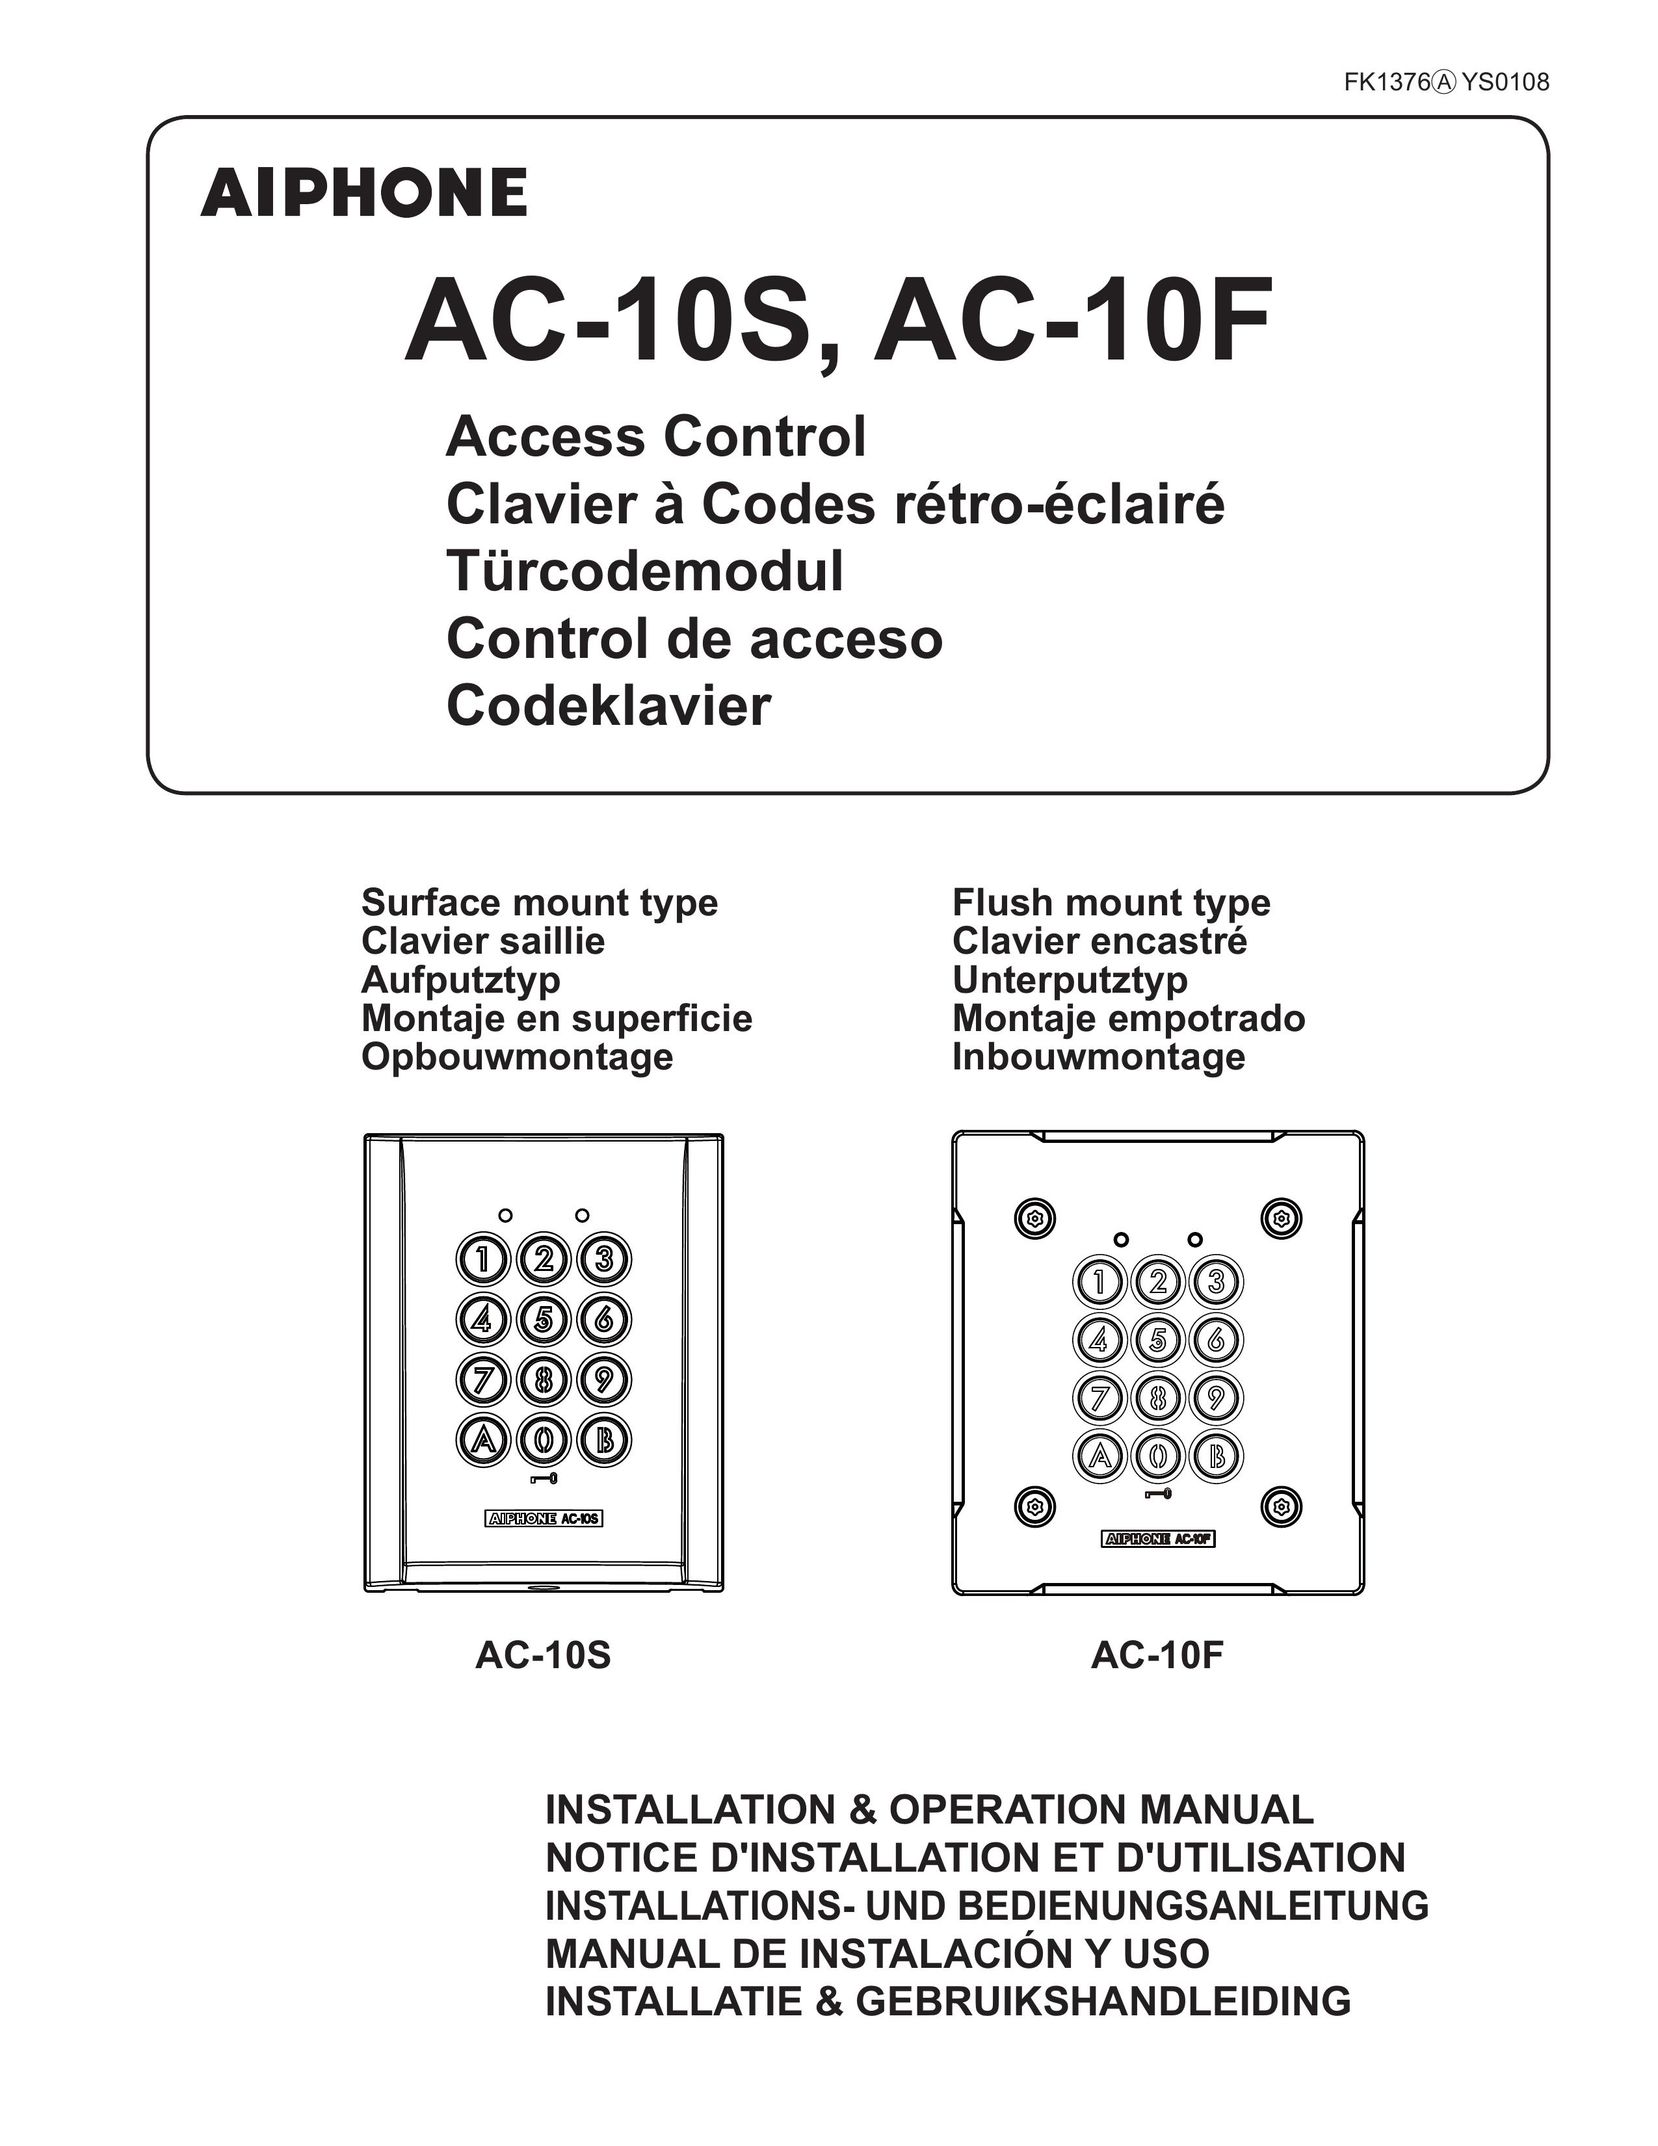 Aiphone AC-10F Home Security System User Manual